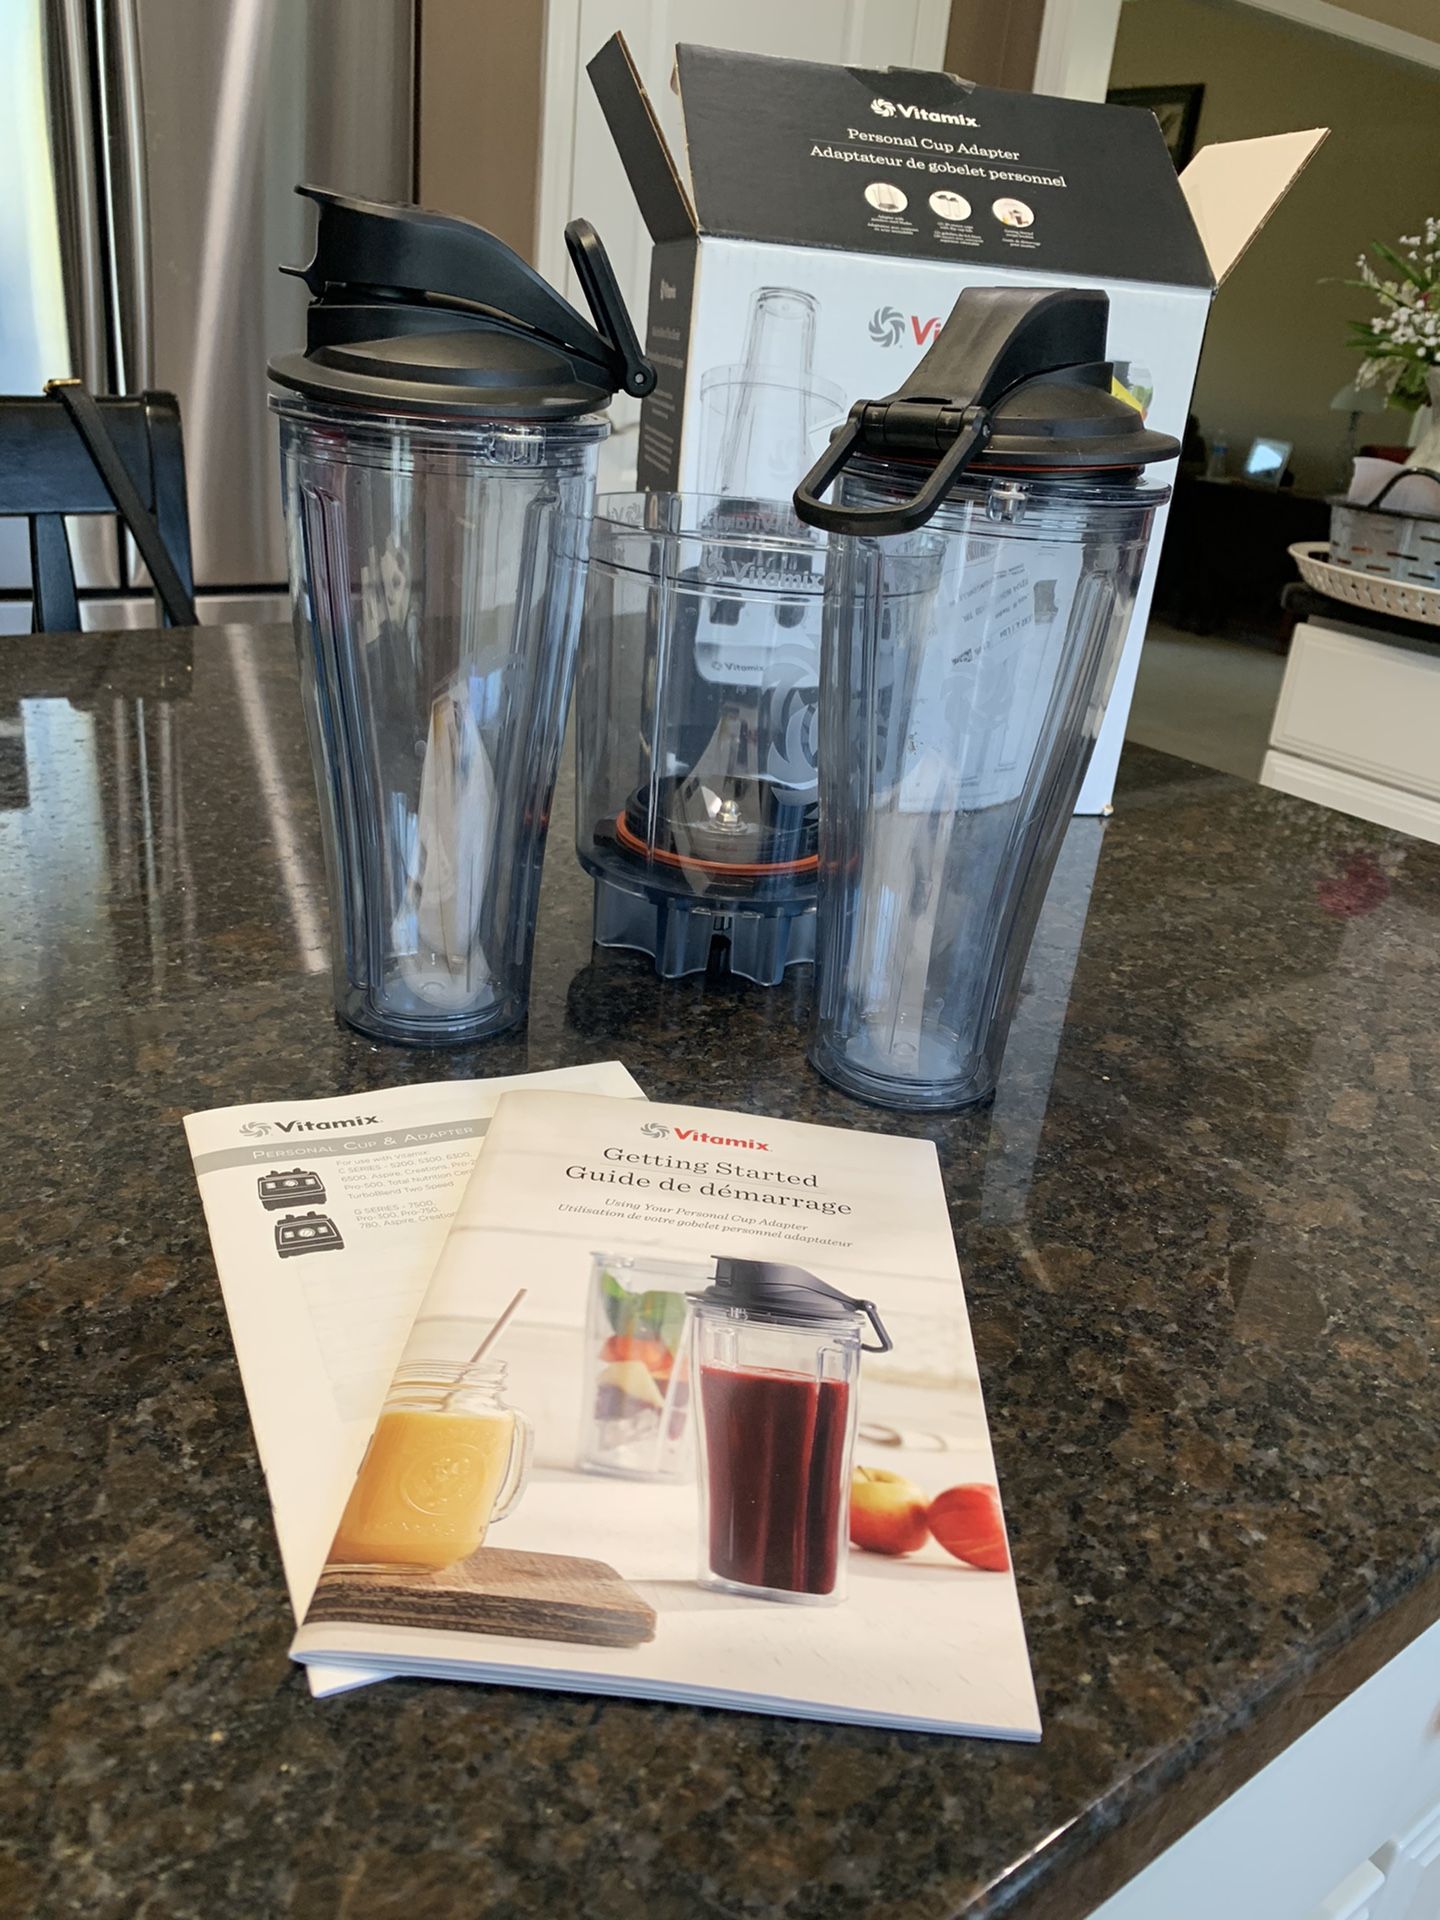 VitaMix Blender With Smoothie Cup Adapter for Sale in Strongsville